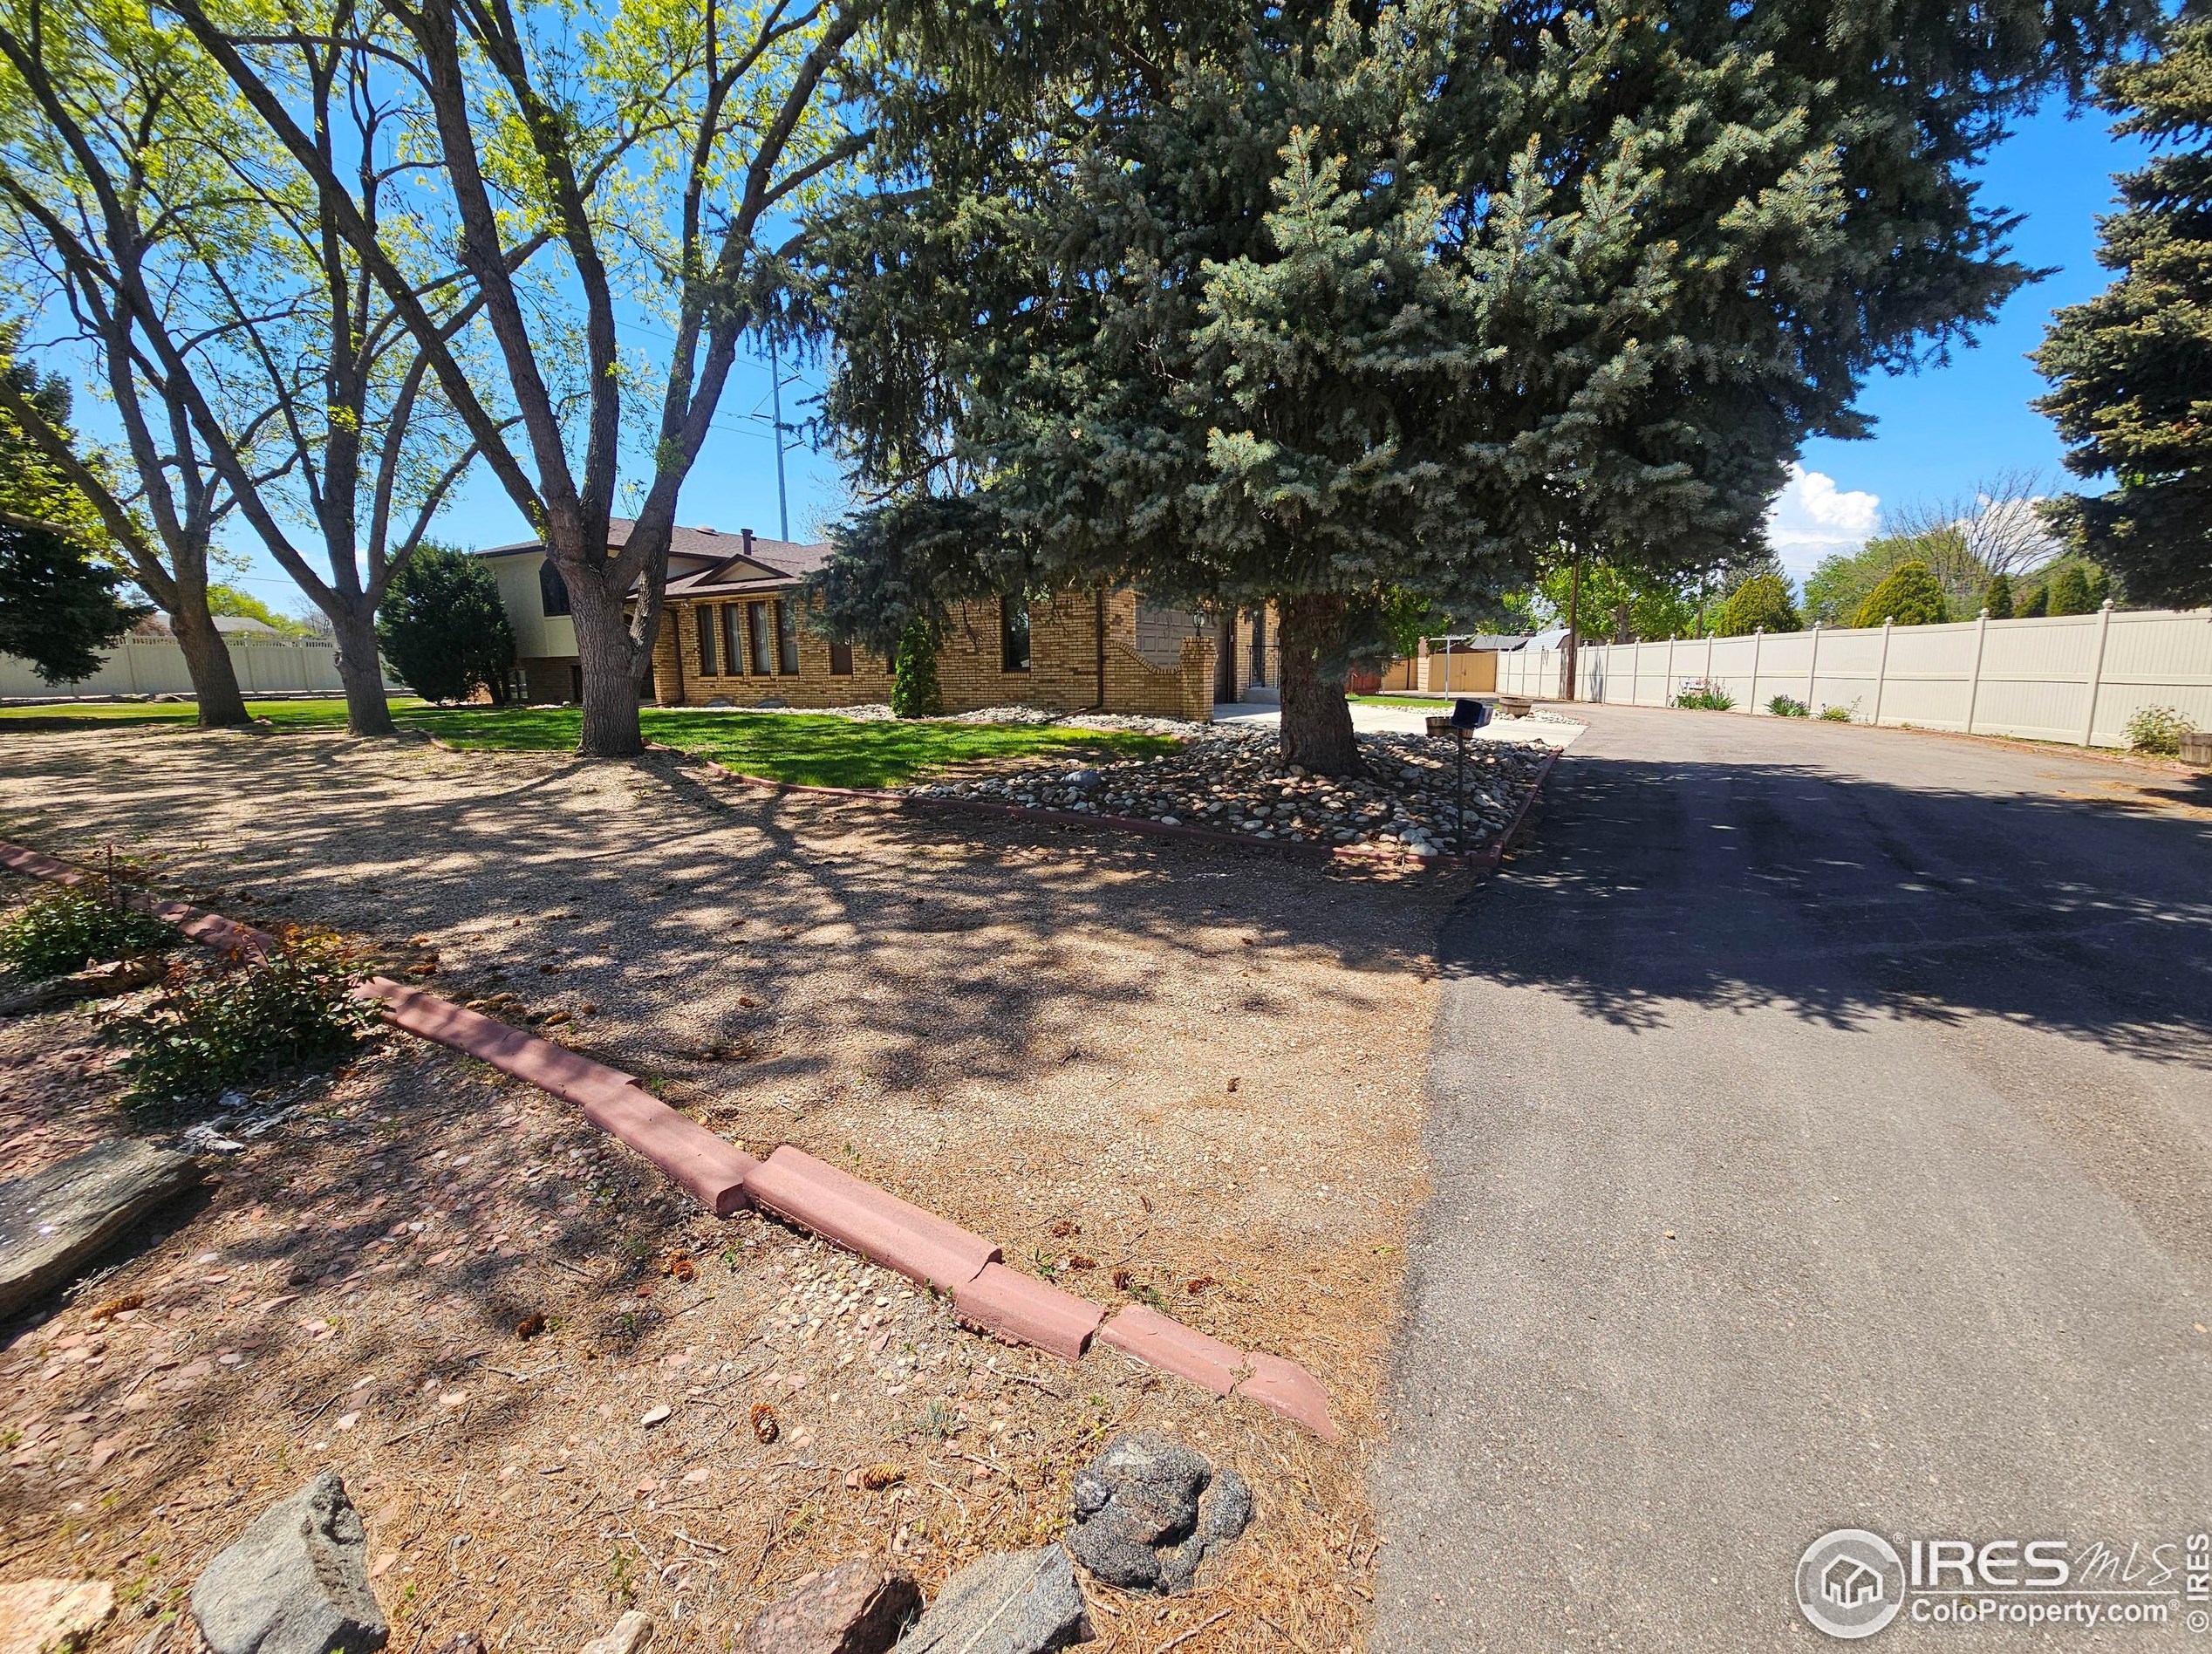 315 38th Ave, Greeley, CO 80634